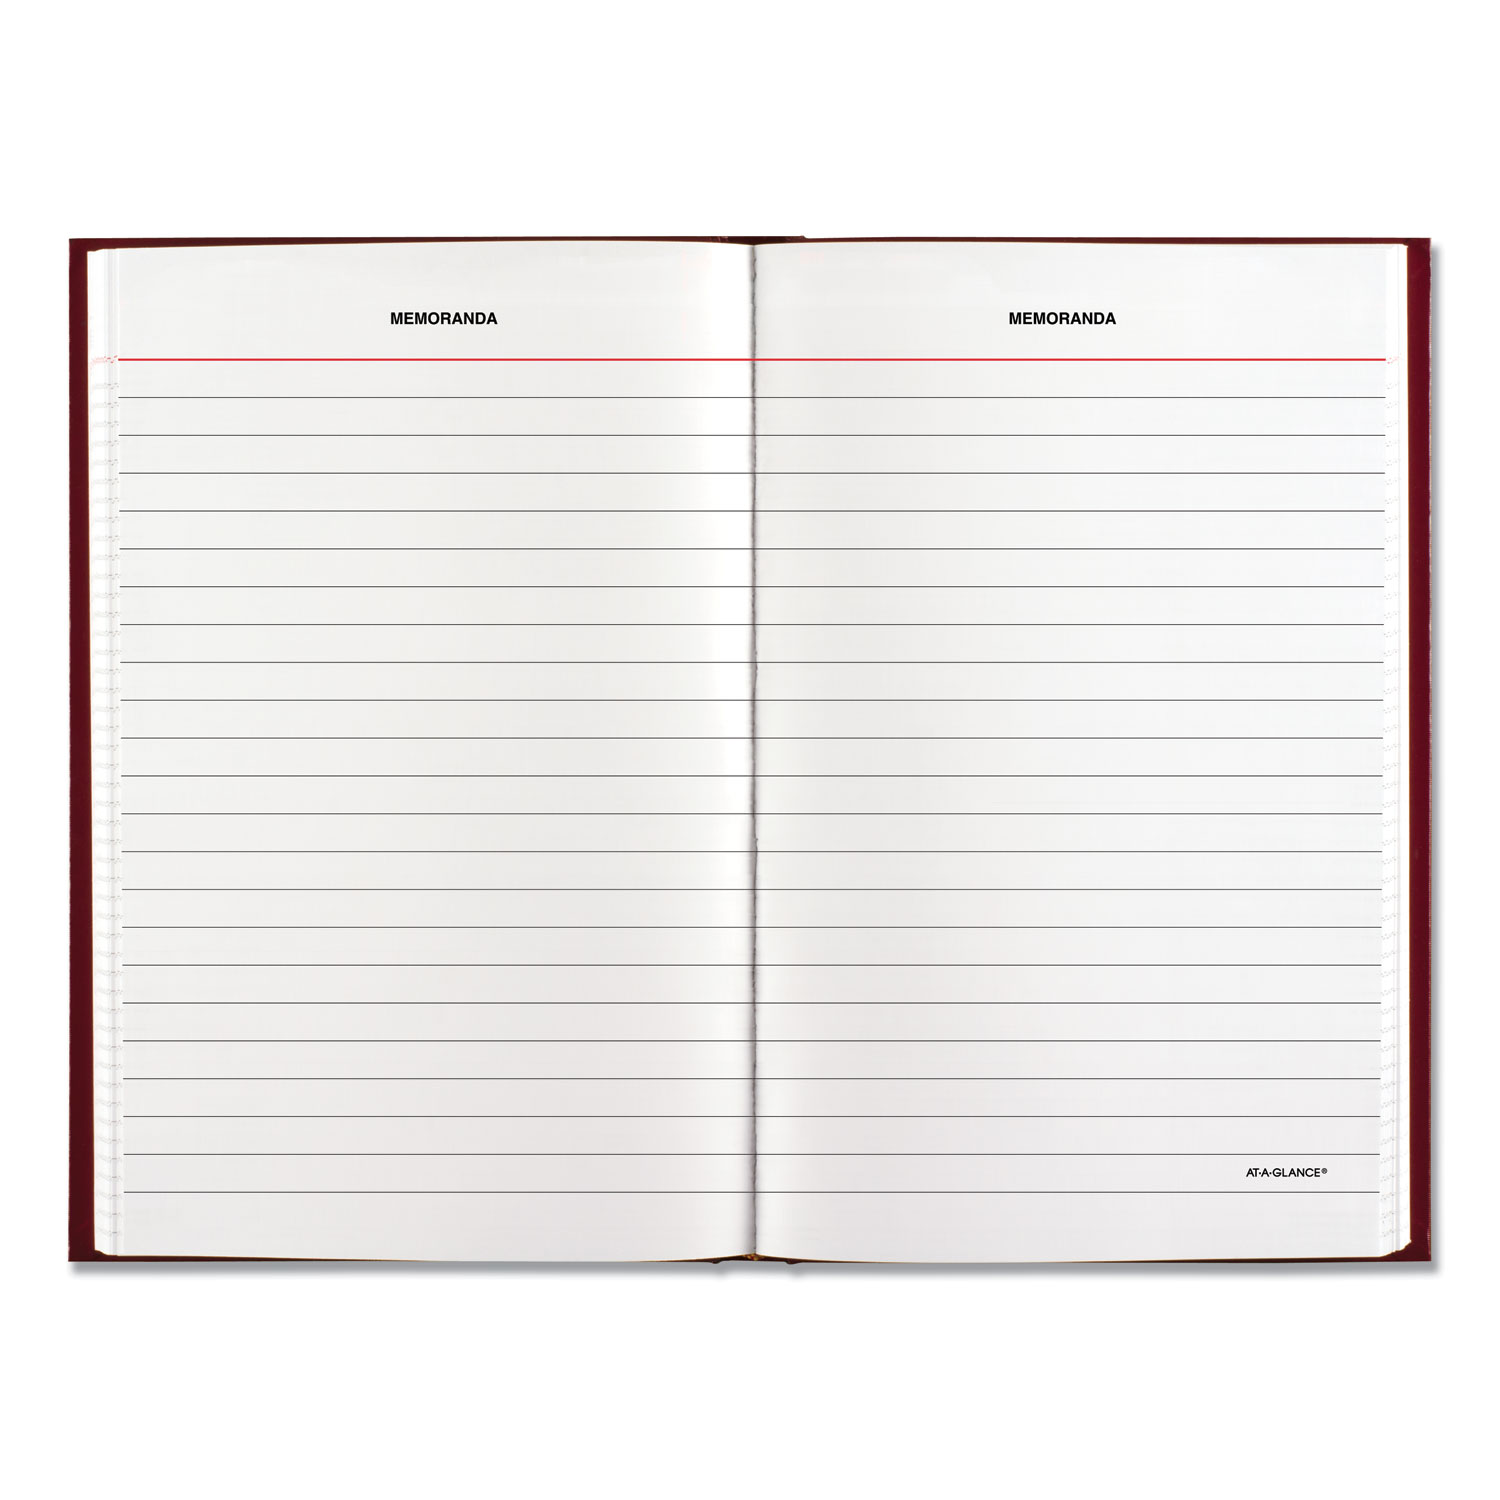 Standard Diary Recycled Daily Reminder, Red, 6 5/8 x 4 1/8, 2020